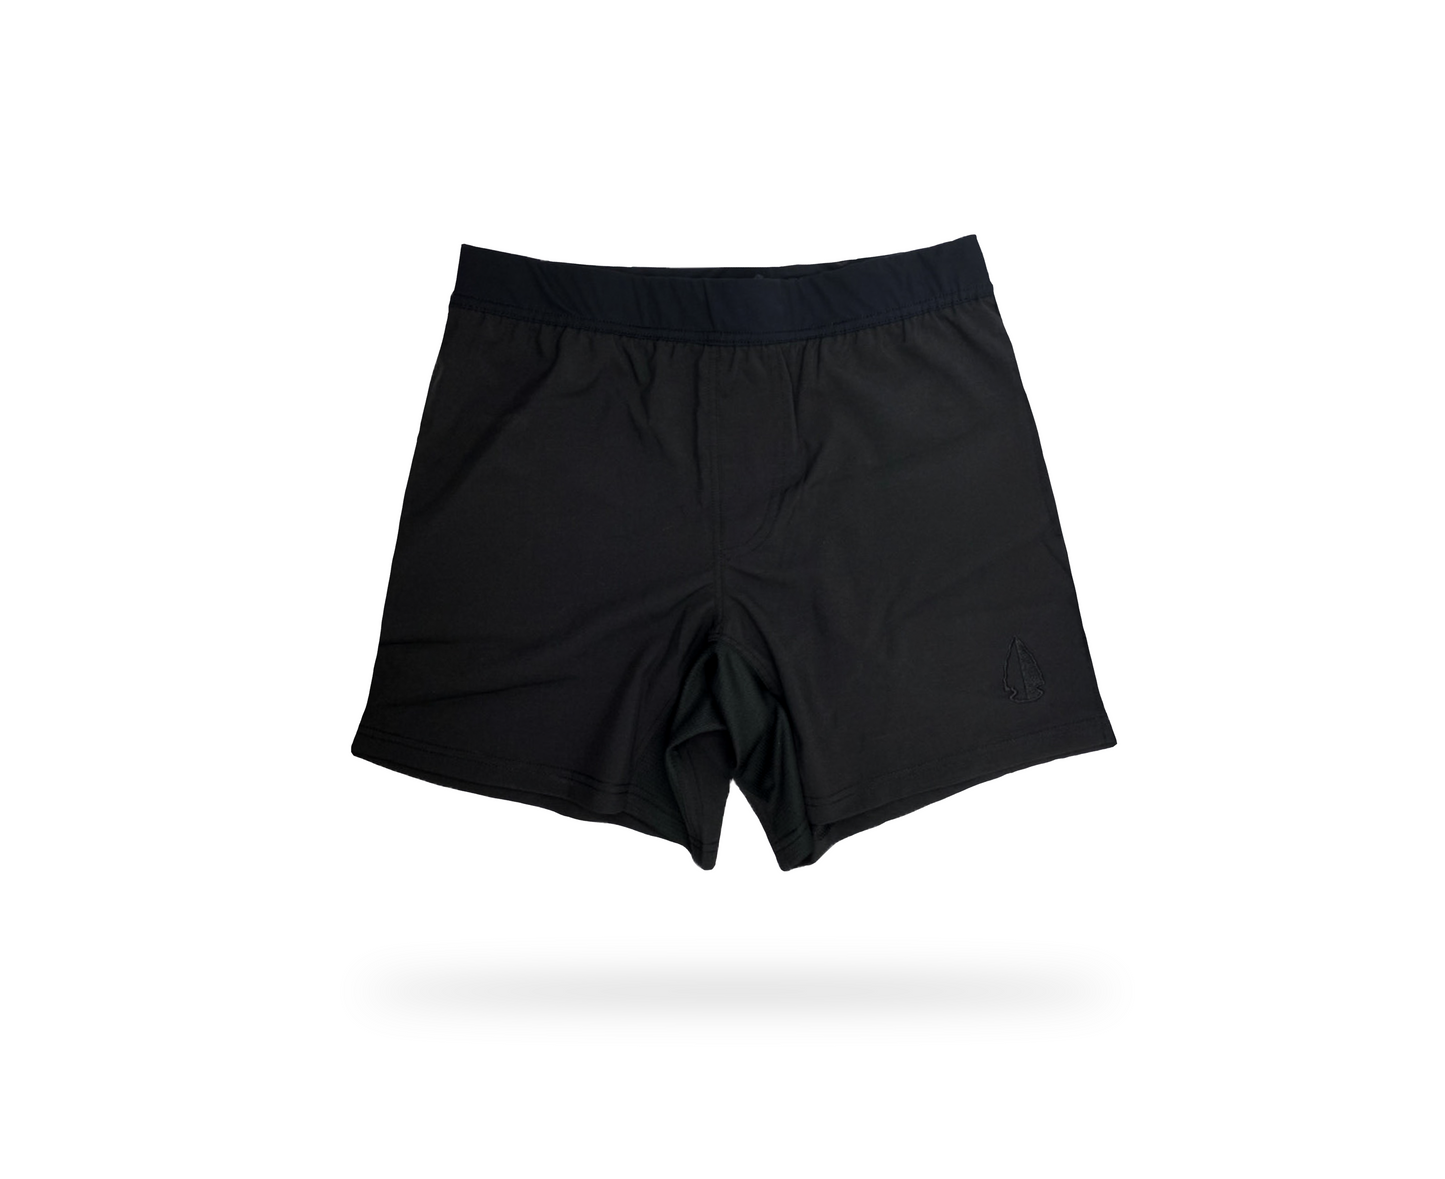 THF Athletic Shorts - Murdered Out